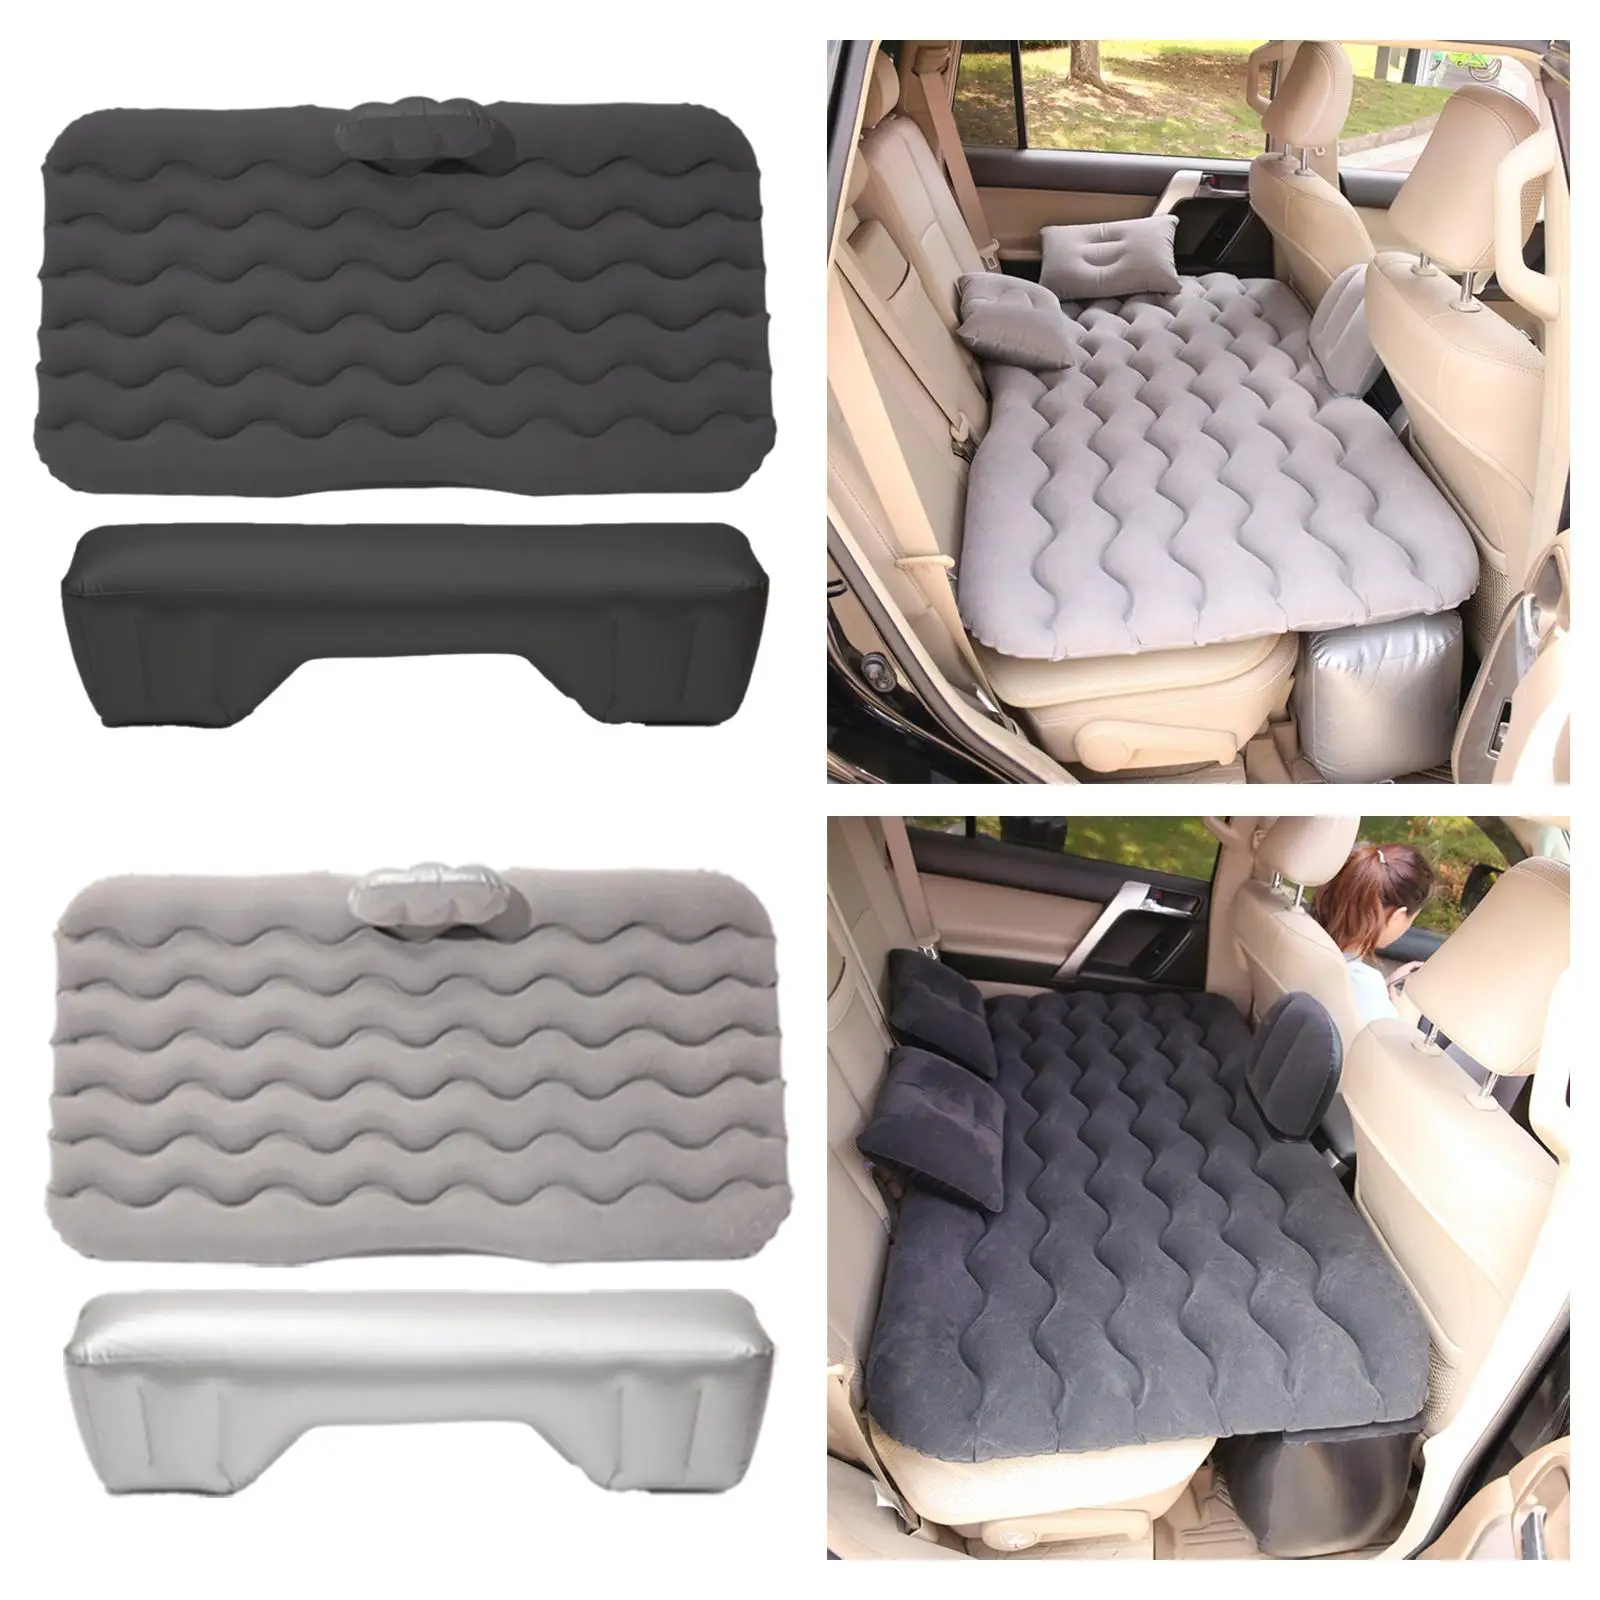 Back Seat Air Mattress Inflatable Rest Cushion Sleeping Bed for Going Out